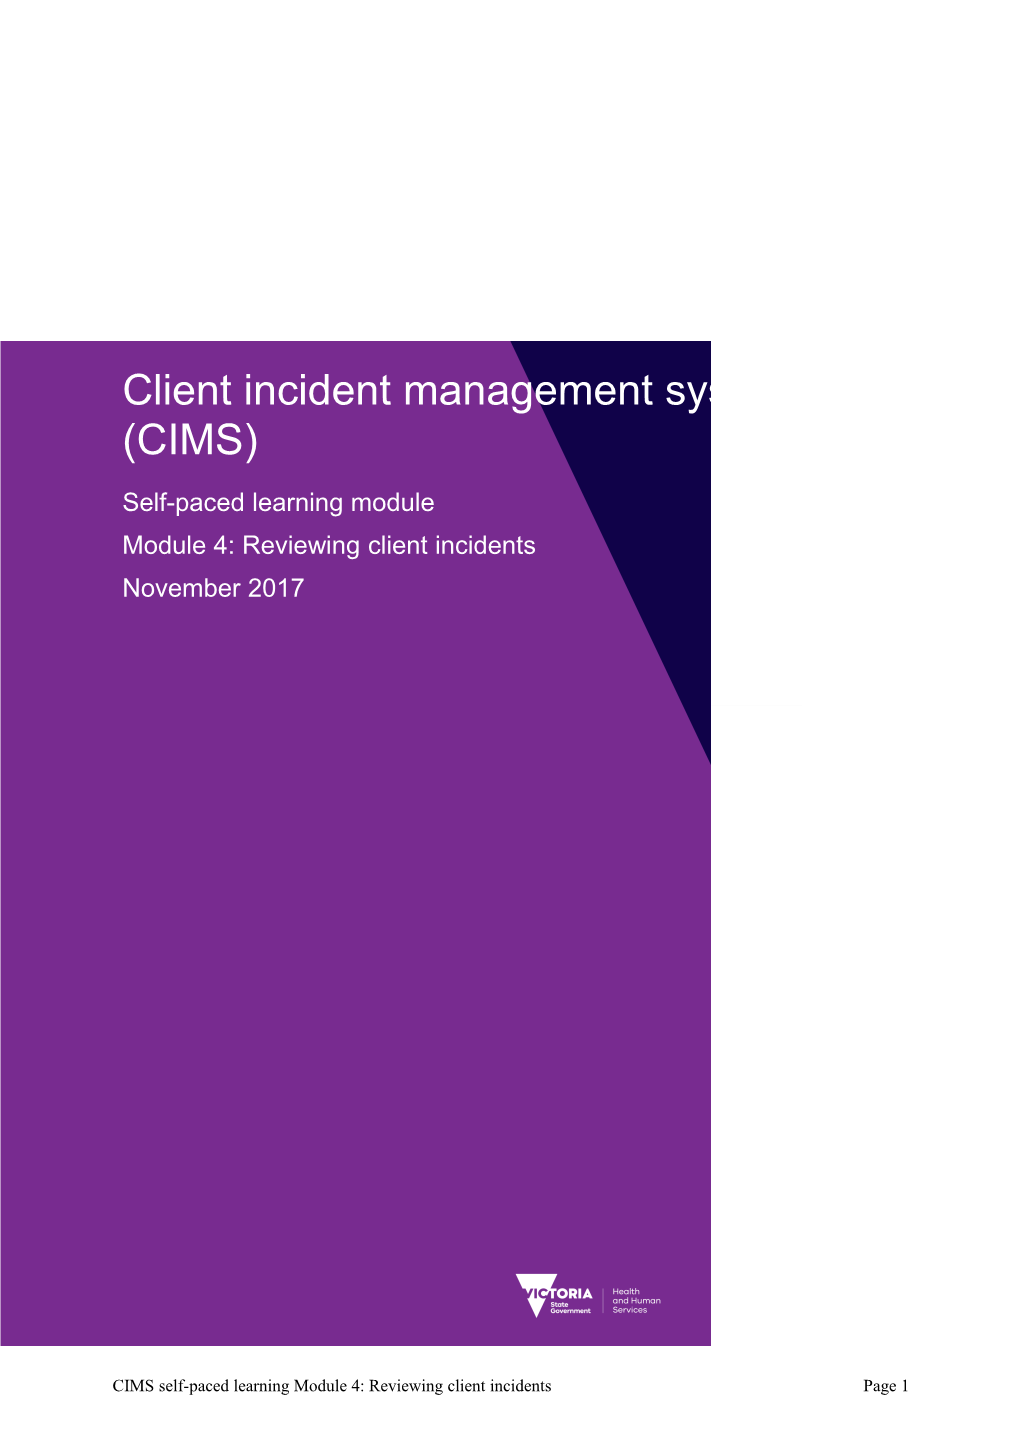 CIMS-Learning-Module-4-Reviewing-Client-Incidents